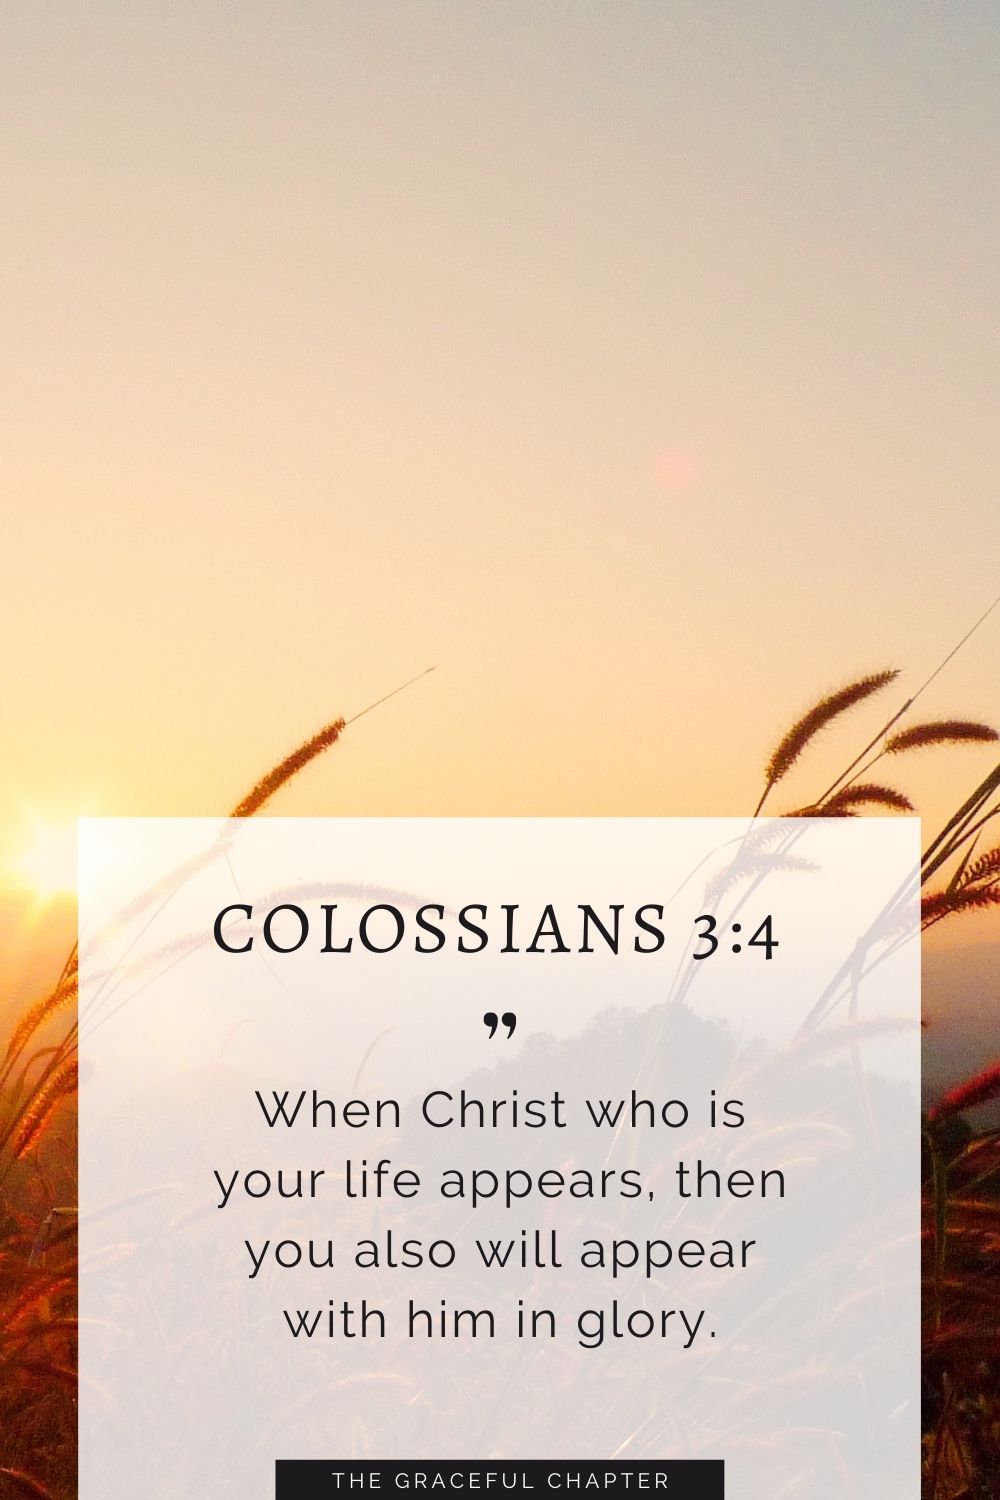 When Christ who is your life appears, then you also will appear with him in glory. Colossians 3:4